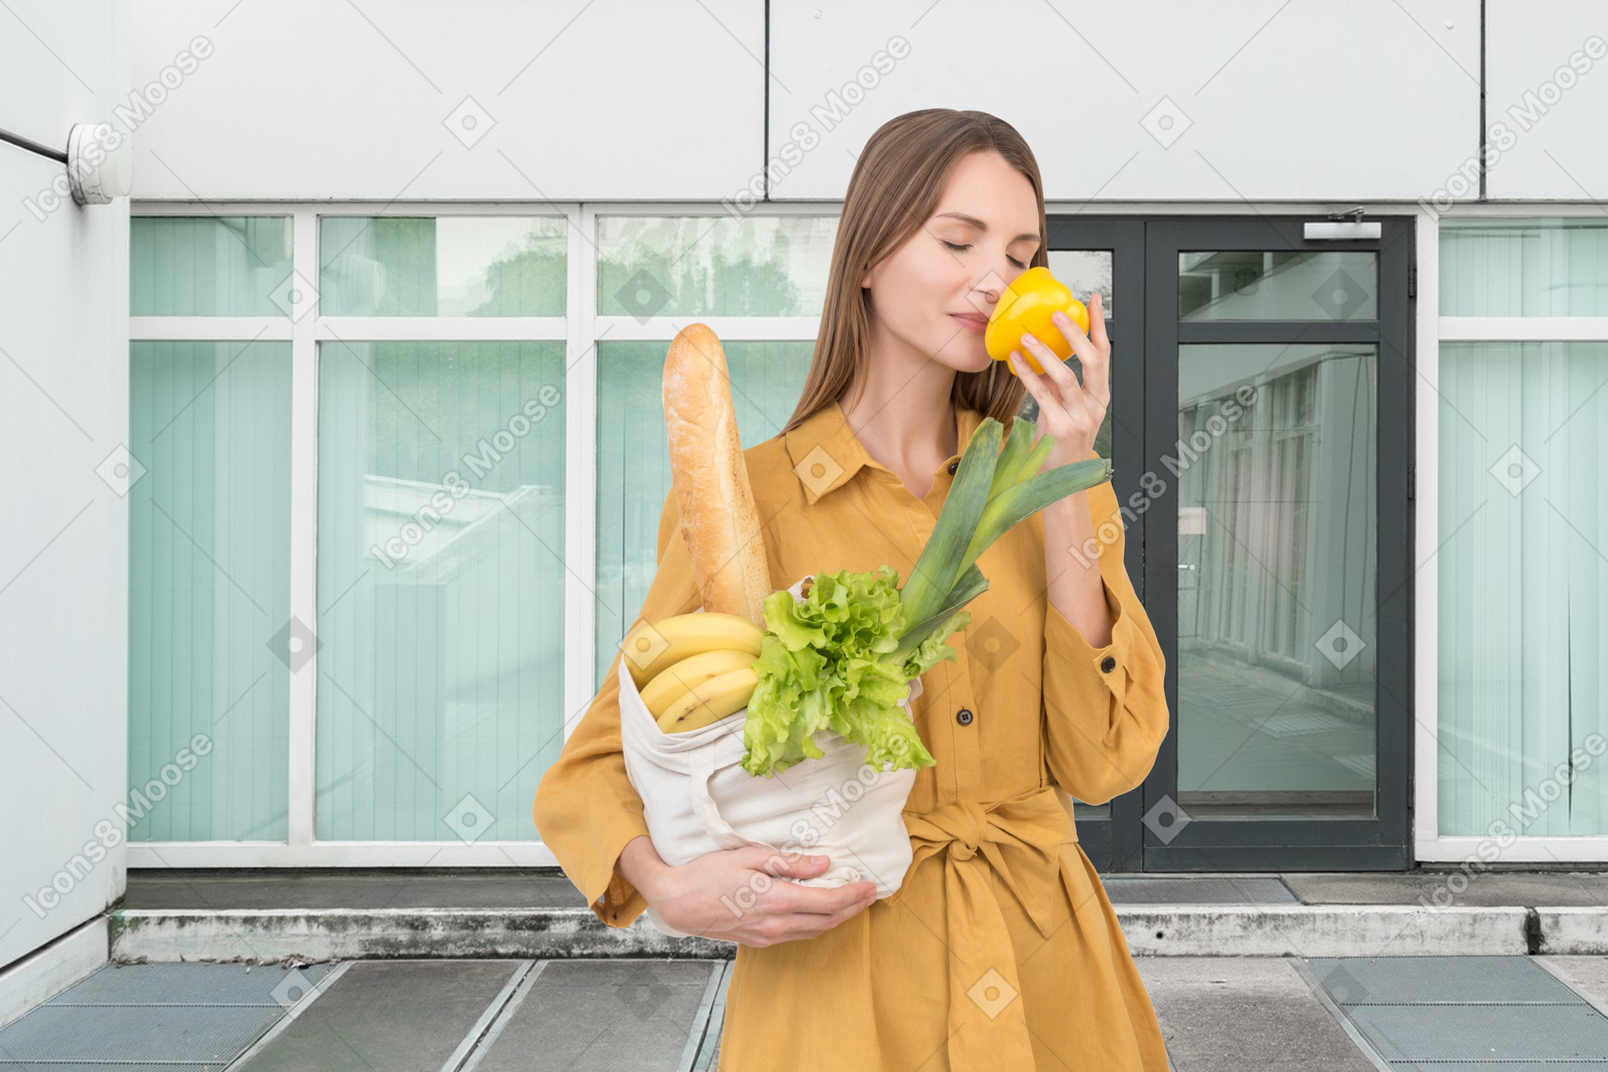 Woman holding a bag of fruit